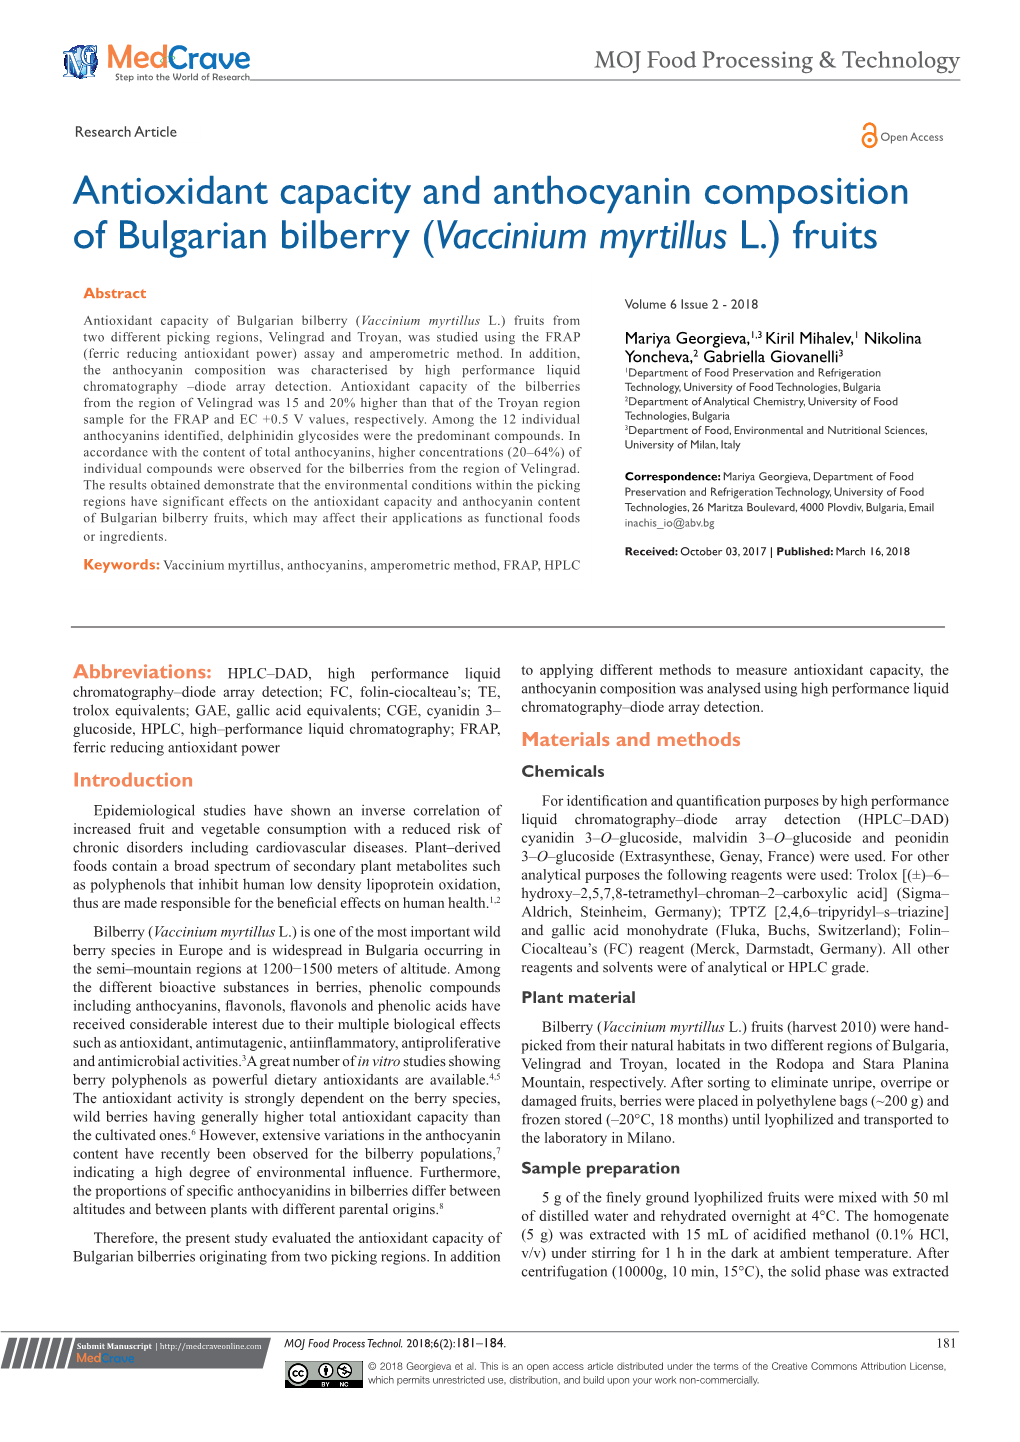 Antioxidant Capacity and Anthocyanin Composition of Bulgarian Bilberry (Vaccinium Myrtillus L.) Fruits